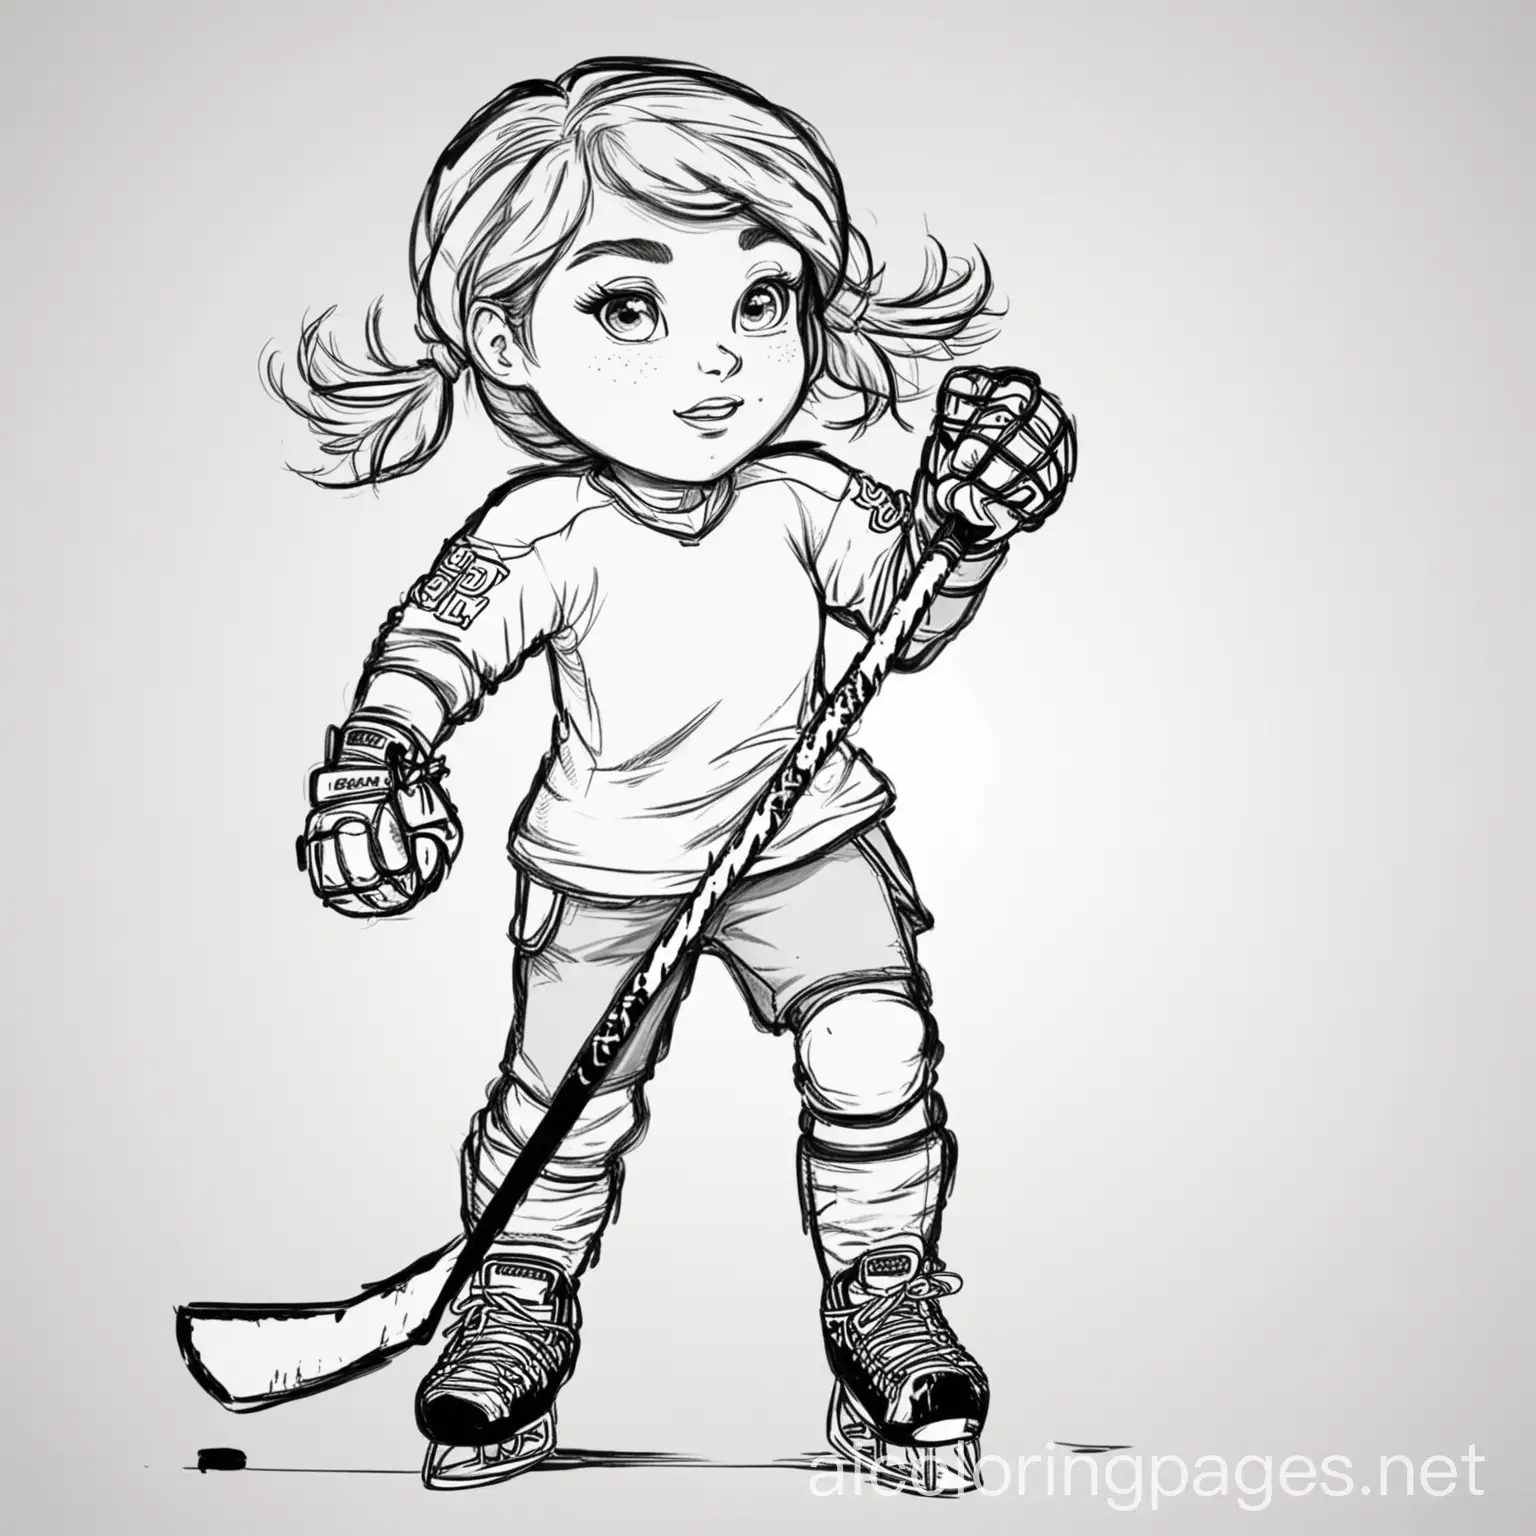 girl hockey player, Coloring Page, black and white, line art, white background, Simplicity, Ample White Space. The background of the coloring page is plain white to make it easy for young children to color within the lines. The outlines of all the subjects are easy to distinguish, making it simple for kids to color without too much difficulty